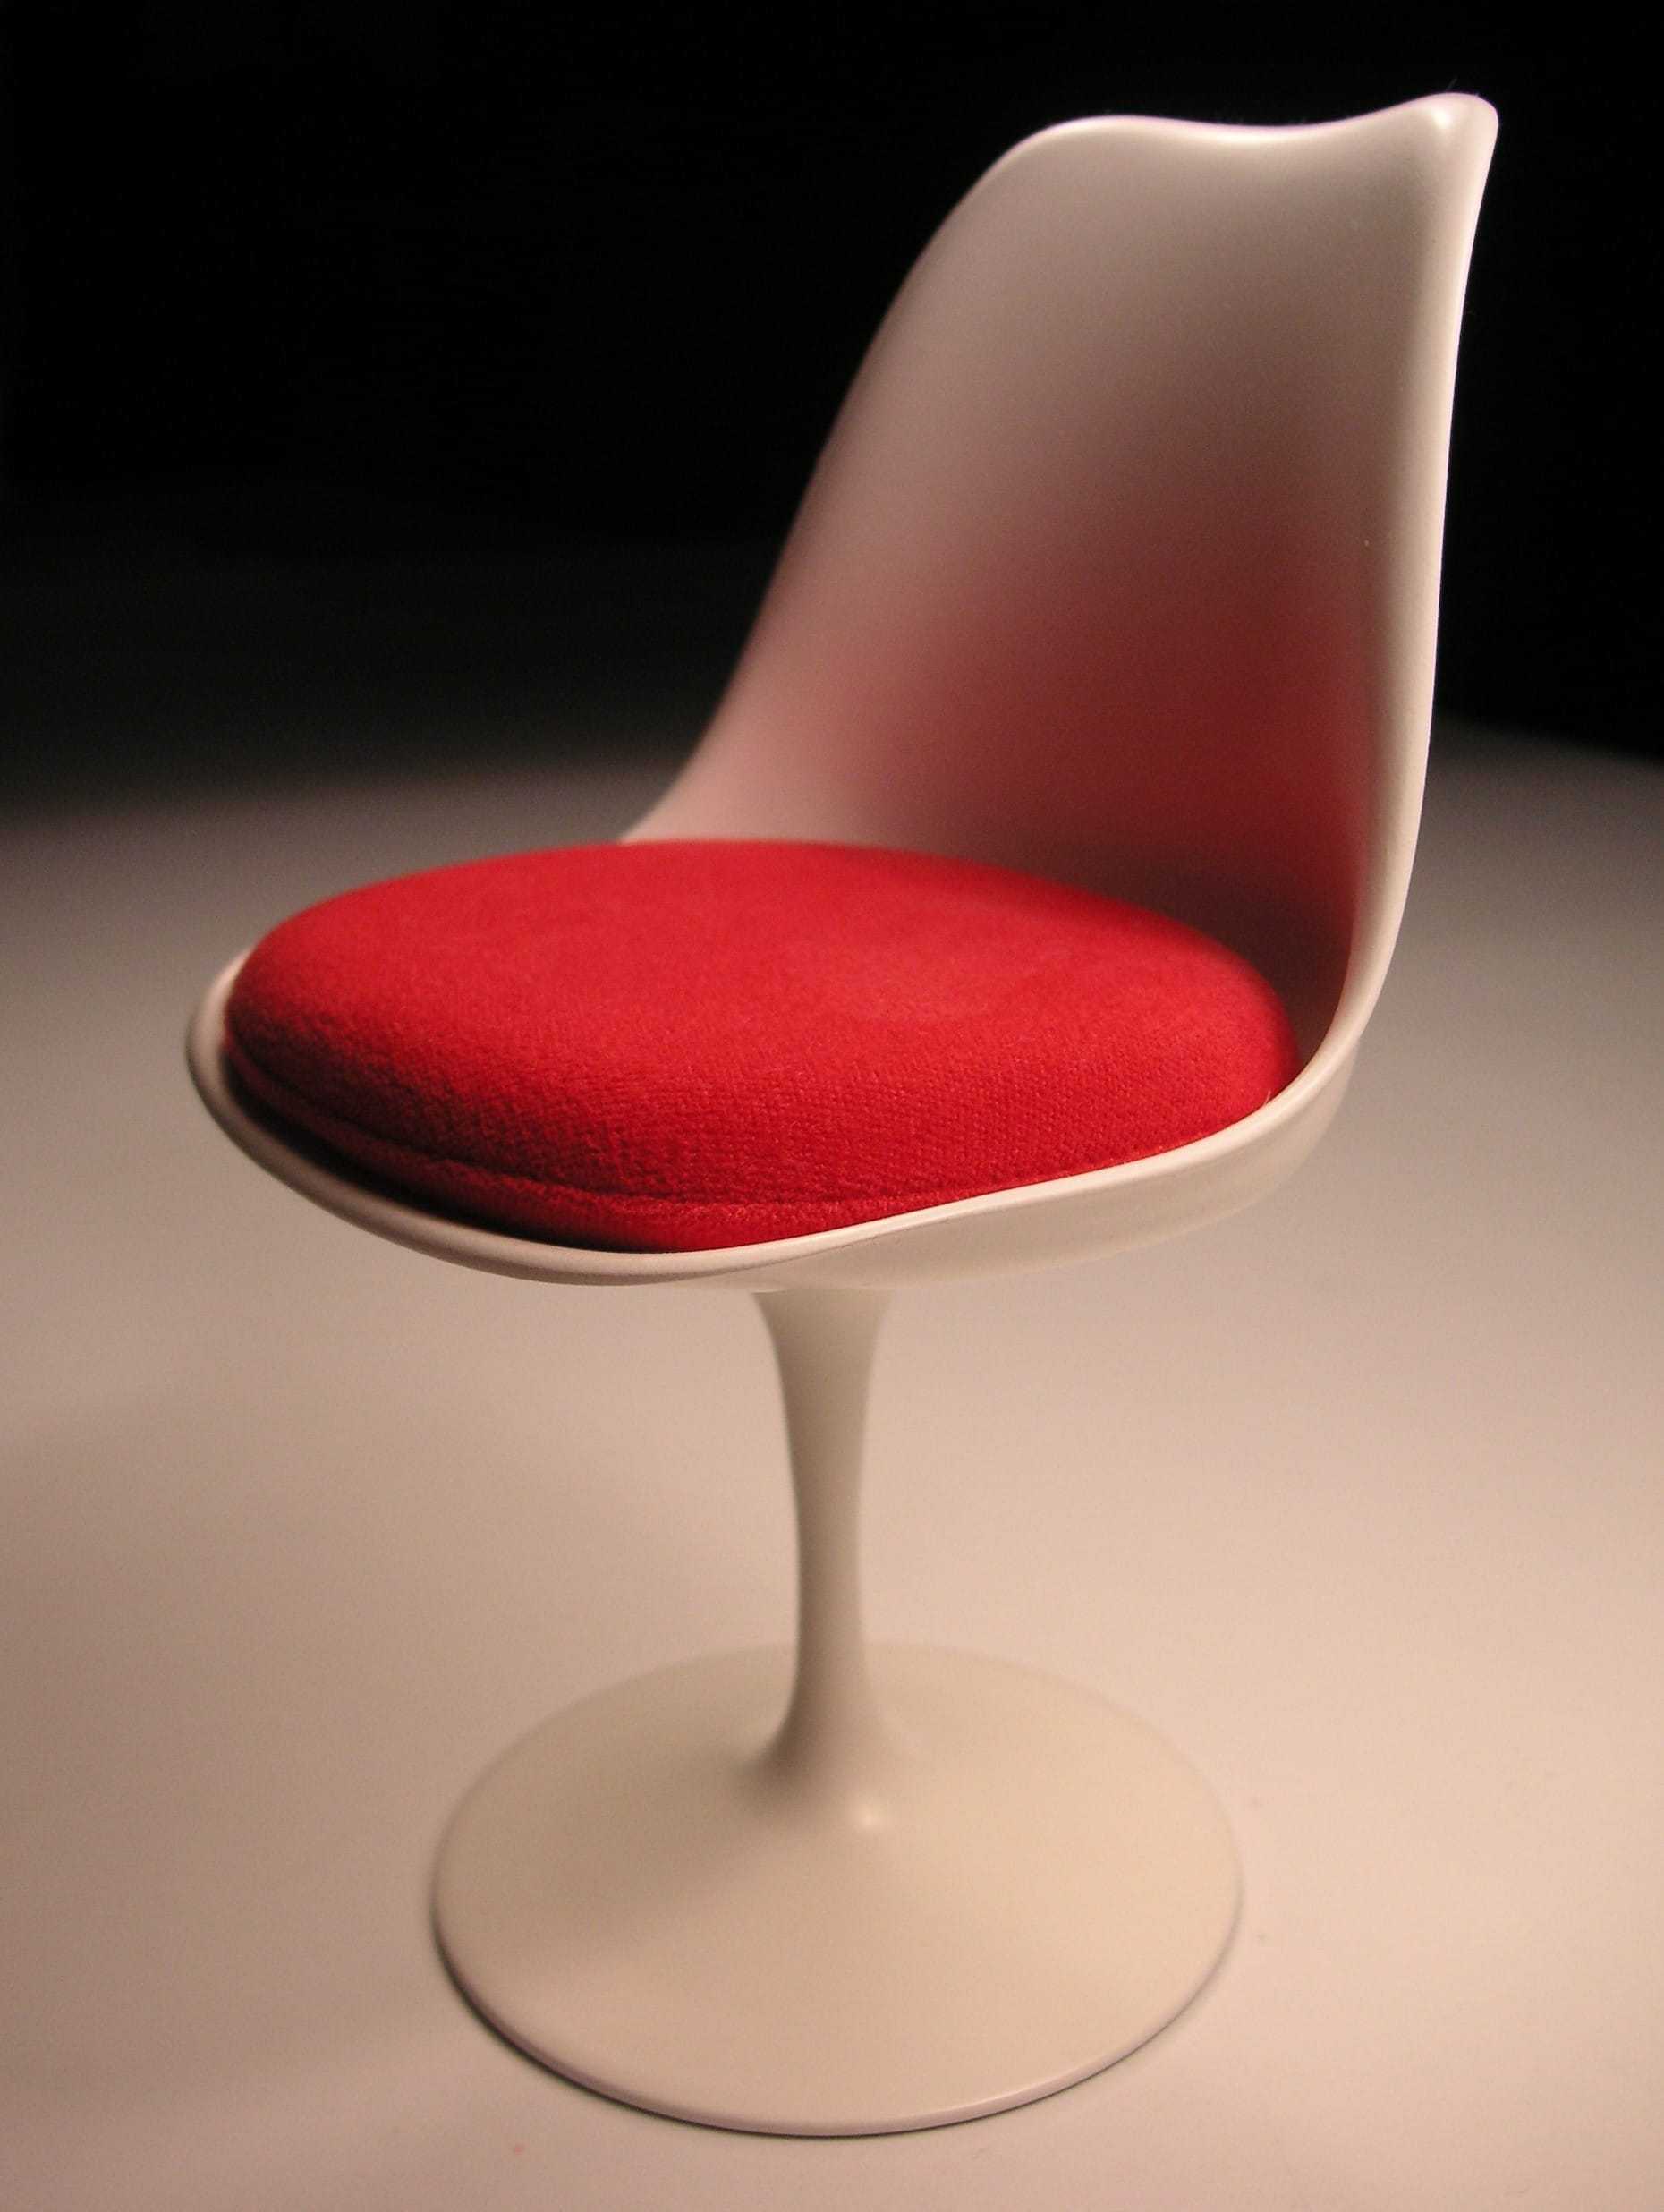 A modern white and red chair.